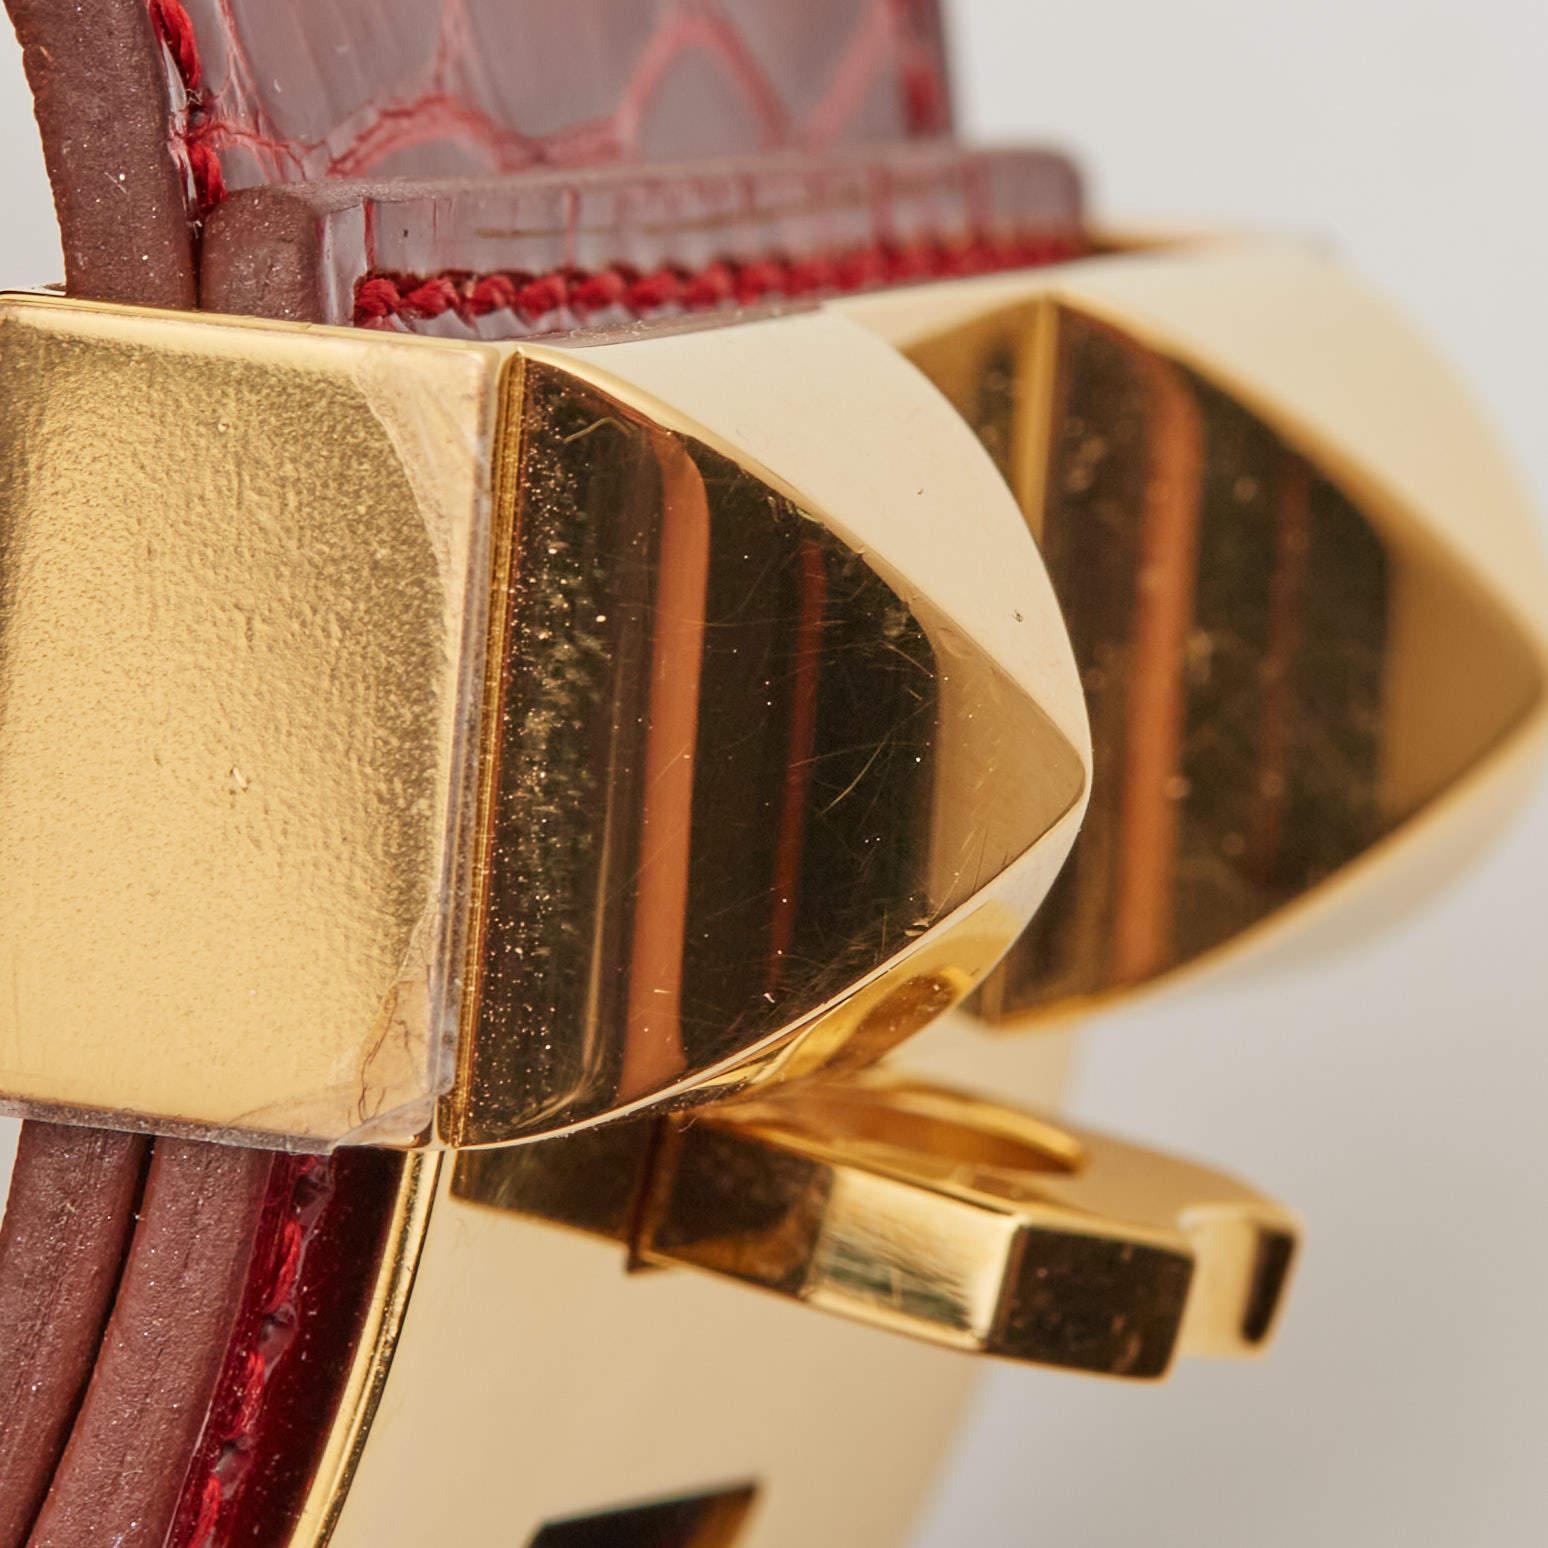 Embrace opulent sophistication with the Hermès Collier de Chien bracelet. Crafted with sumptuous alligator leather and adorned with gleaming gold-plated hardware, it exudes timeless elegance, making it a coveted statement piece for the discerning